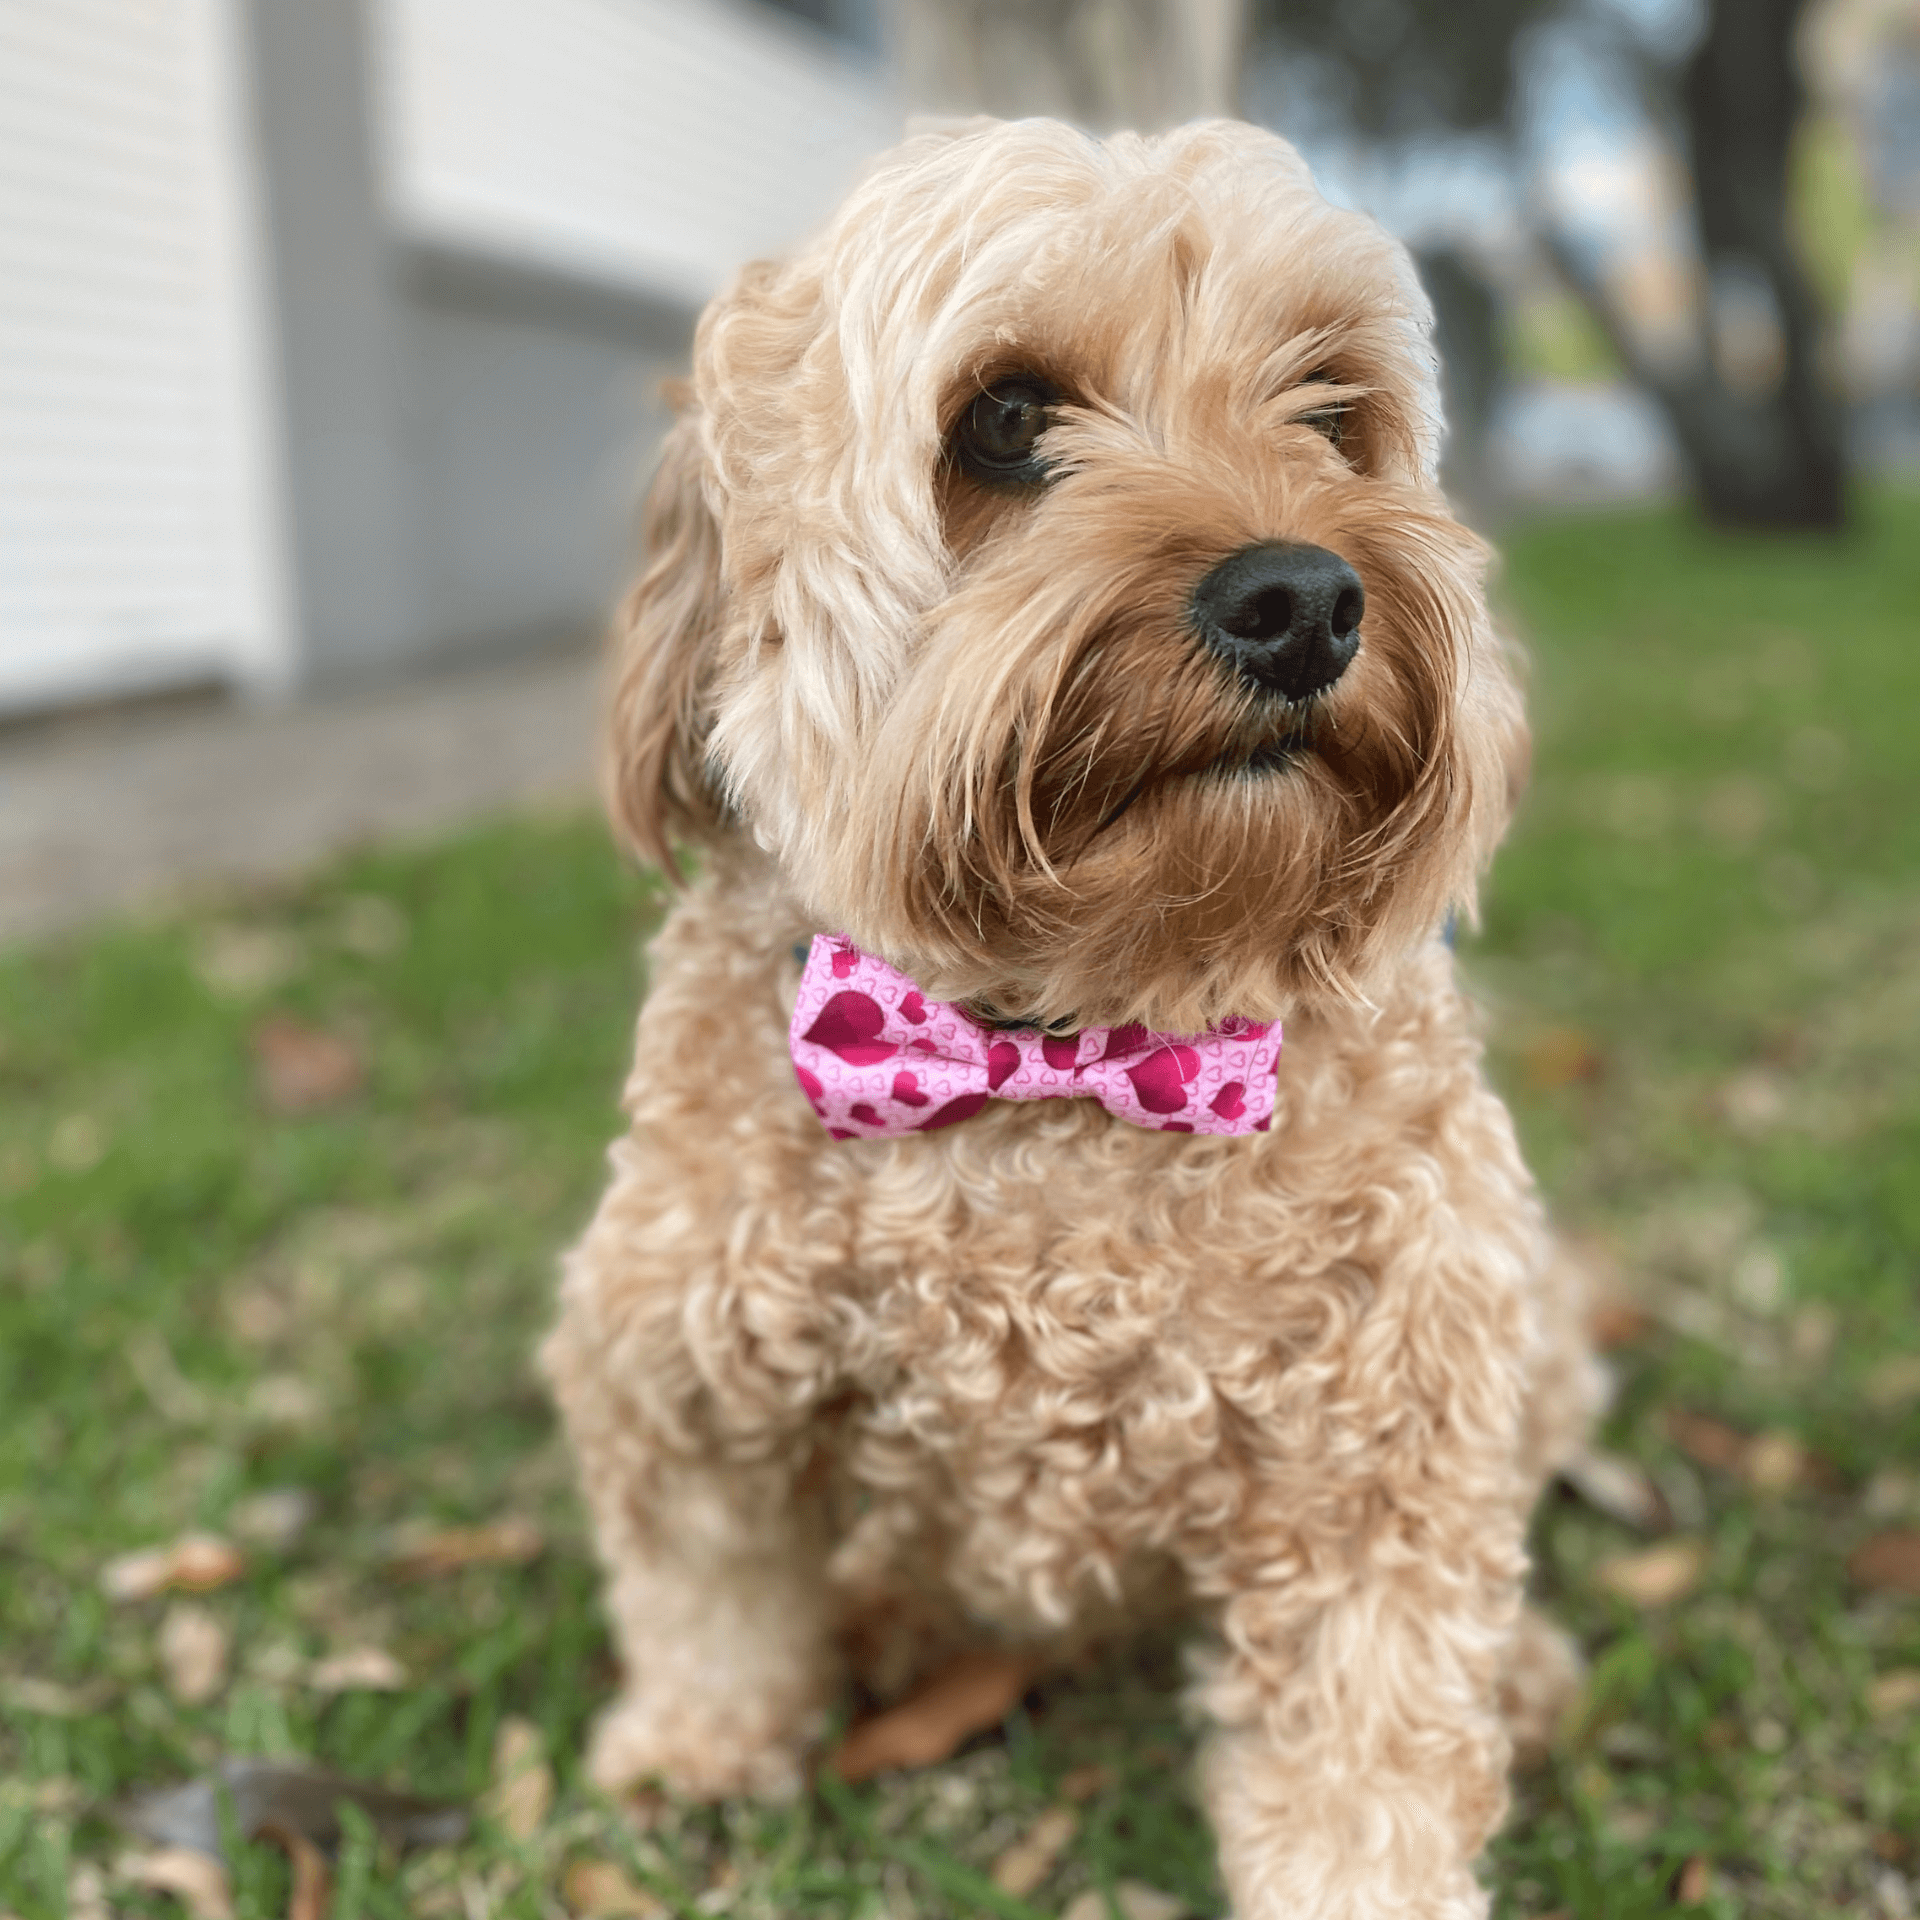 Dog bow with hearts fashion accessory, let's pawty 